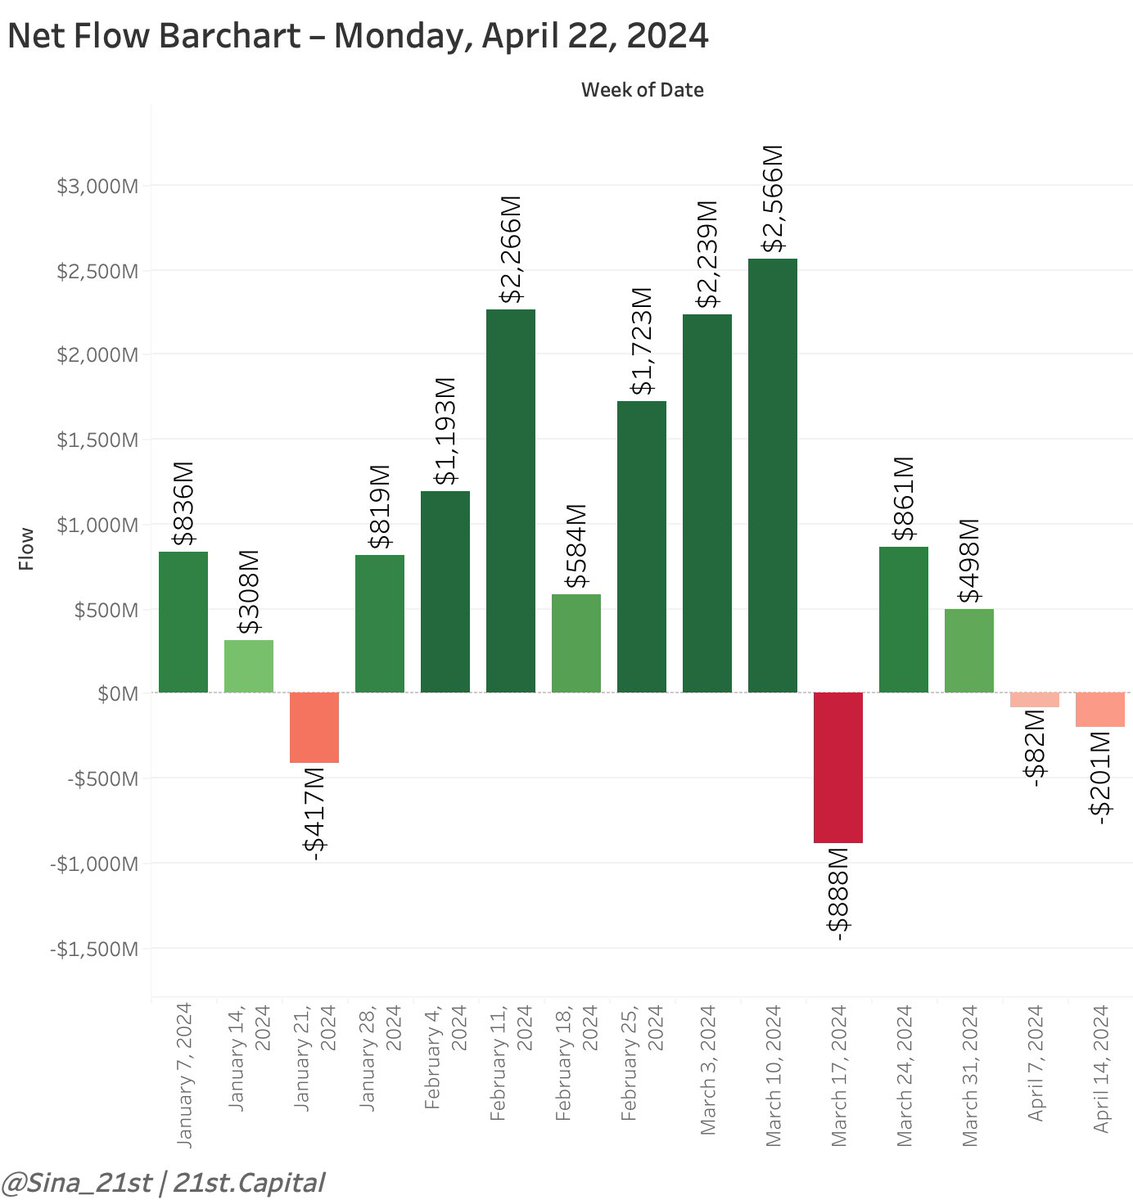 #Bitcoin ETFs Update – April 22, 2024

This week is off to a great start. The smaller ETFs have already covered $GBTC's outflow even without Blackrock or Fidelity's help. 🧵

1/ Big Picture: Last week was the third worst week on record with -$201M of outflows.